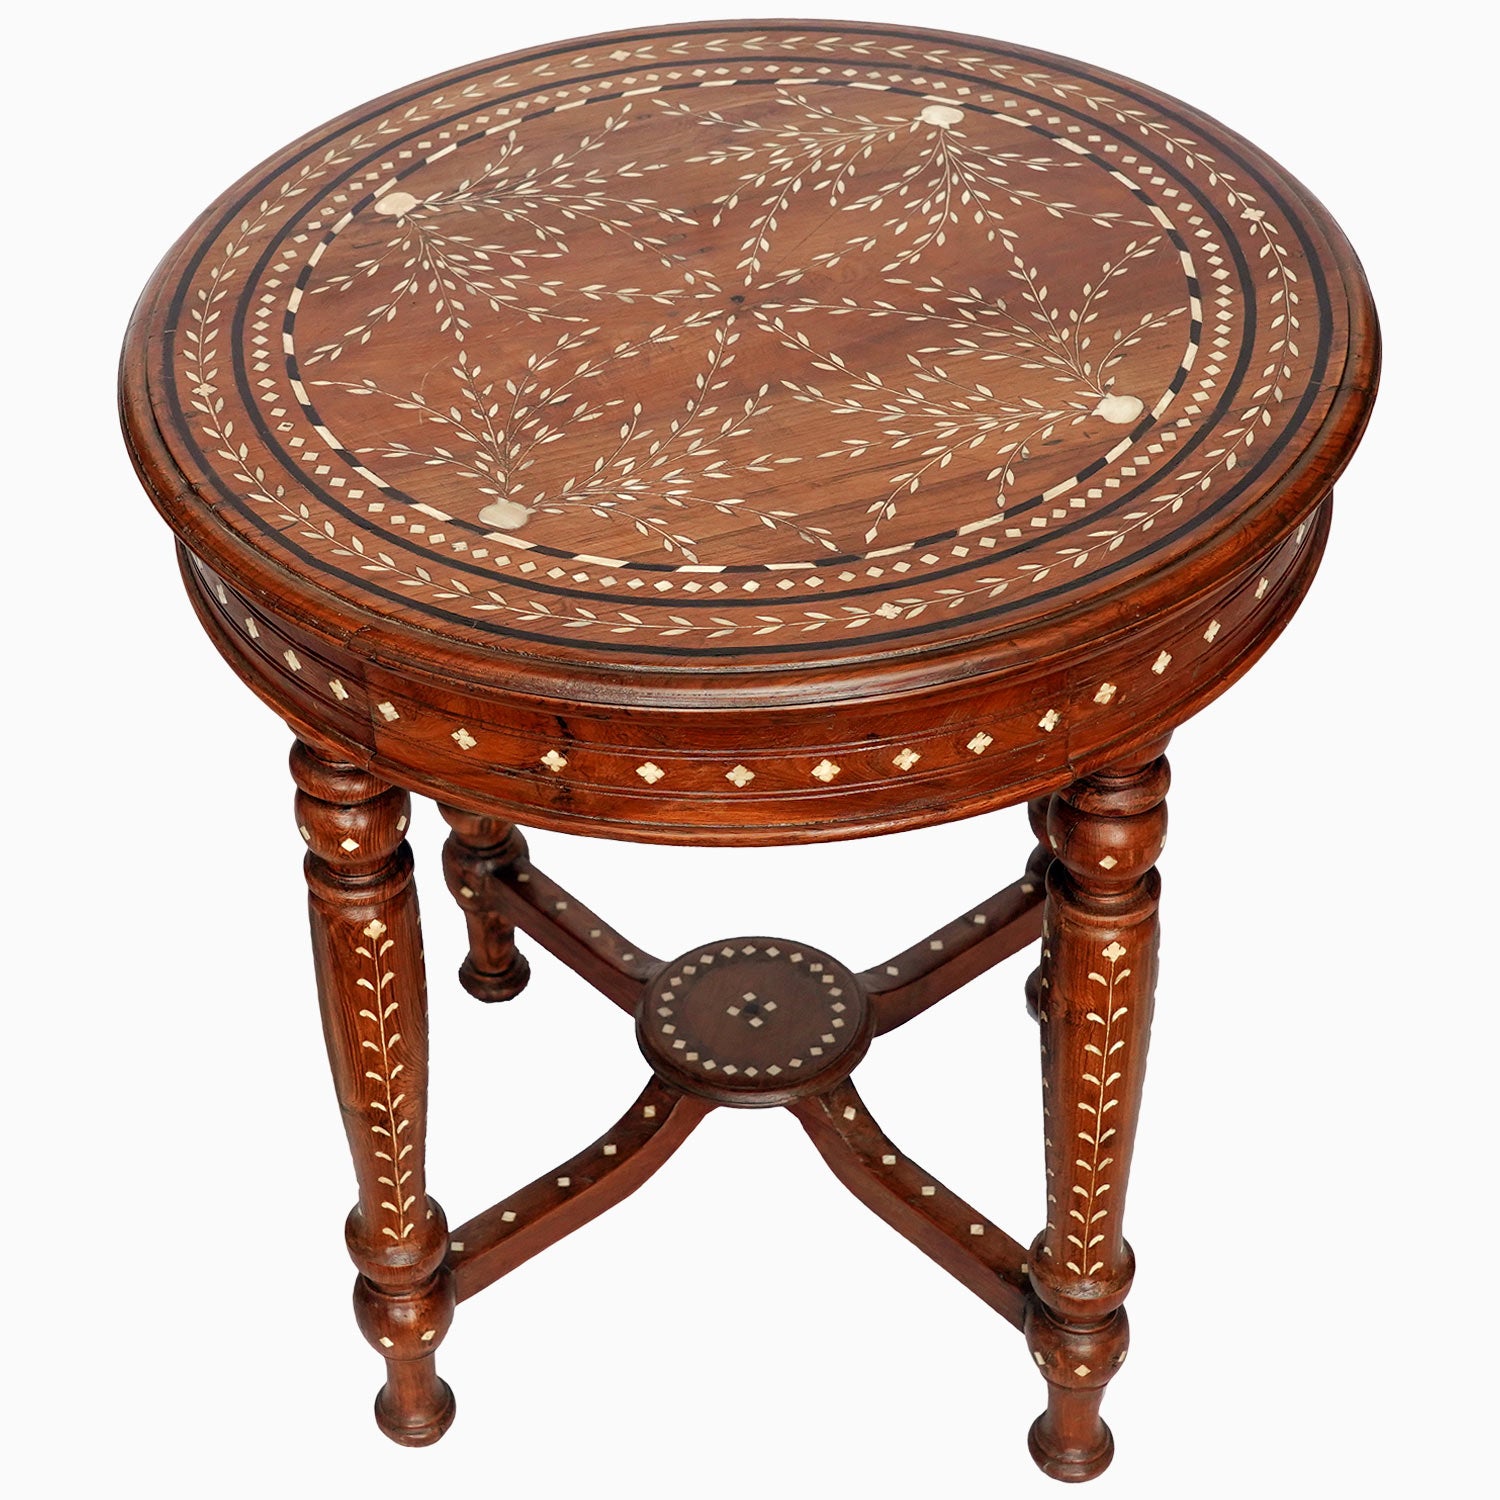 Round Wooden Inlay Table 12 Main